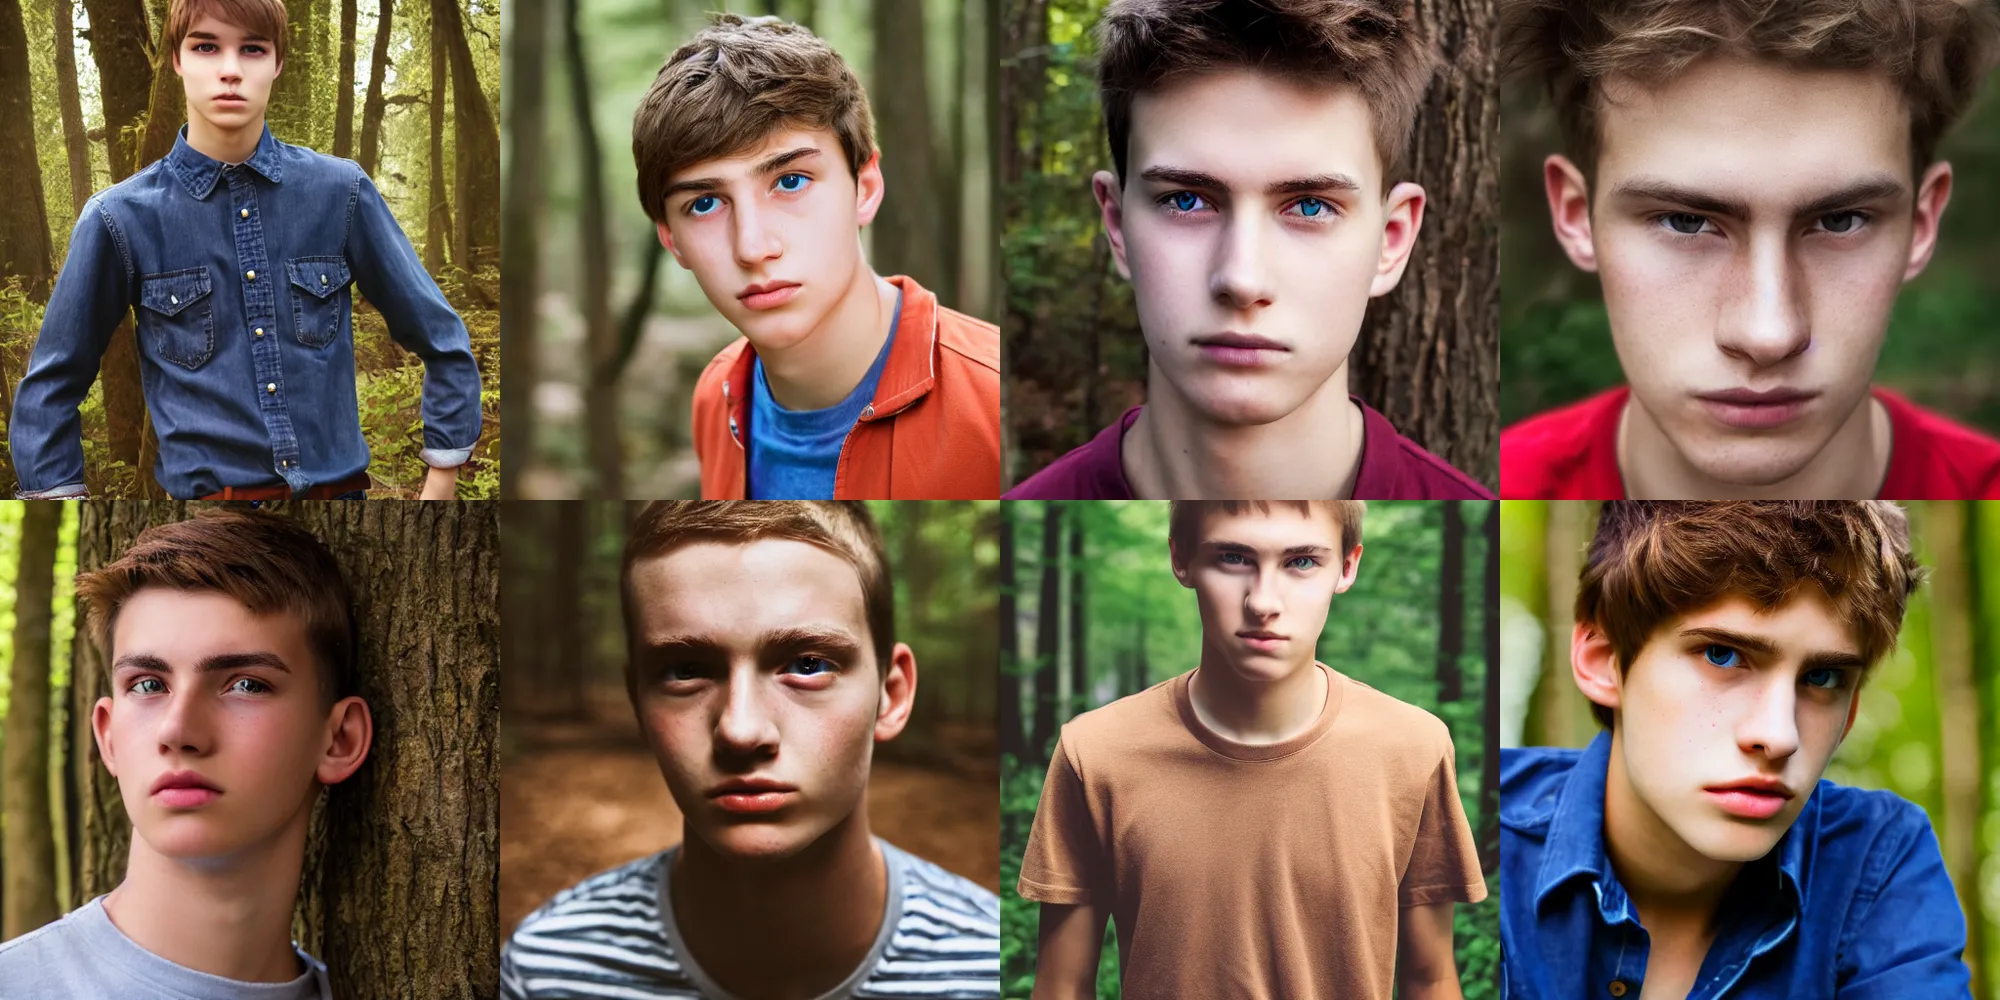 Prompt: portrait, male teenager, natural eyes, brown hair, thin eyebrows, red shirt, blue jeans, walking in forest, detailed face, realistic photo.